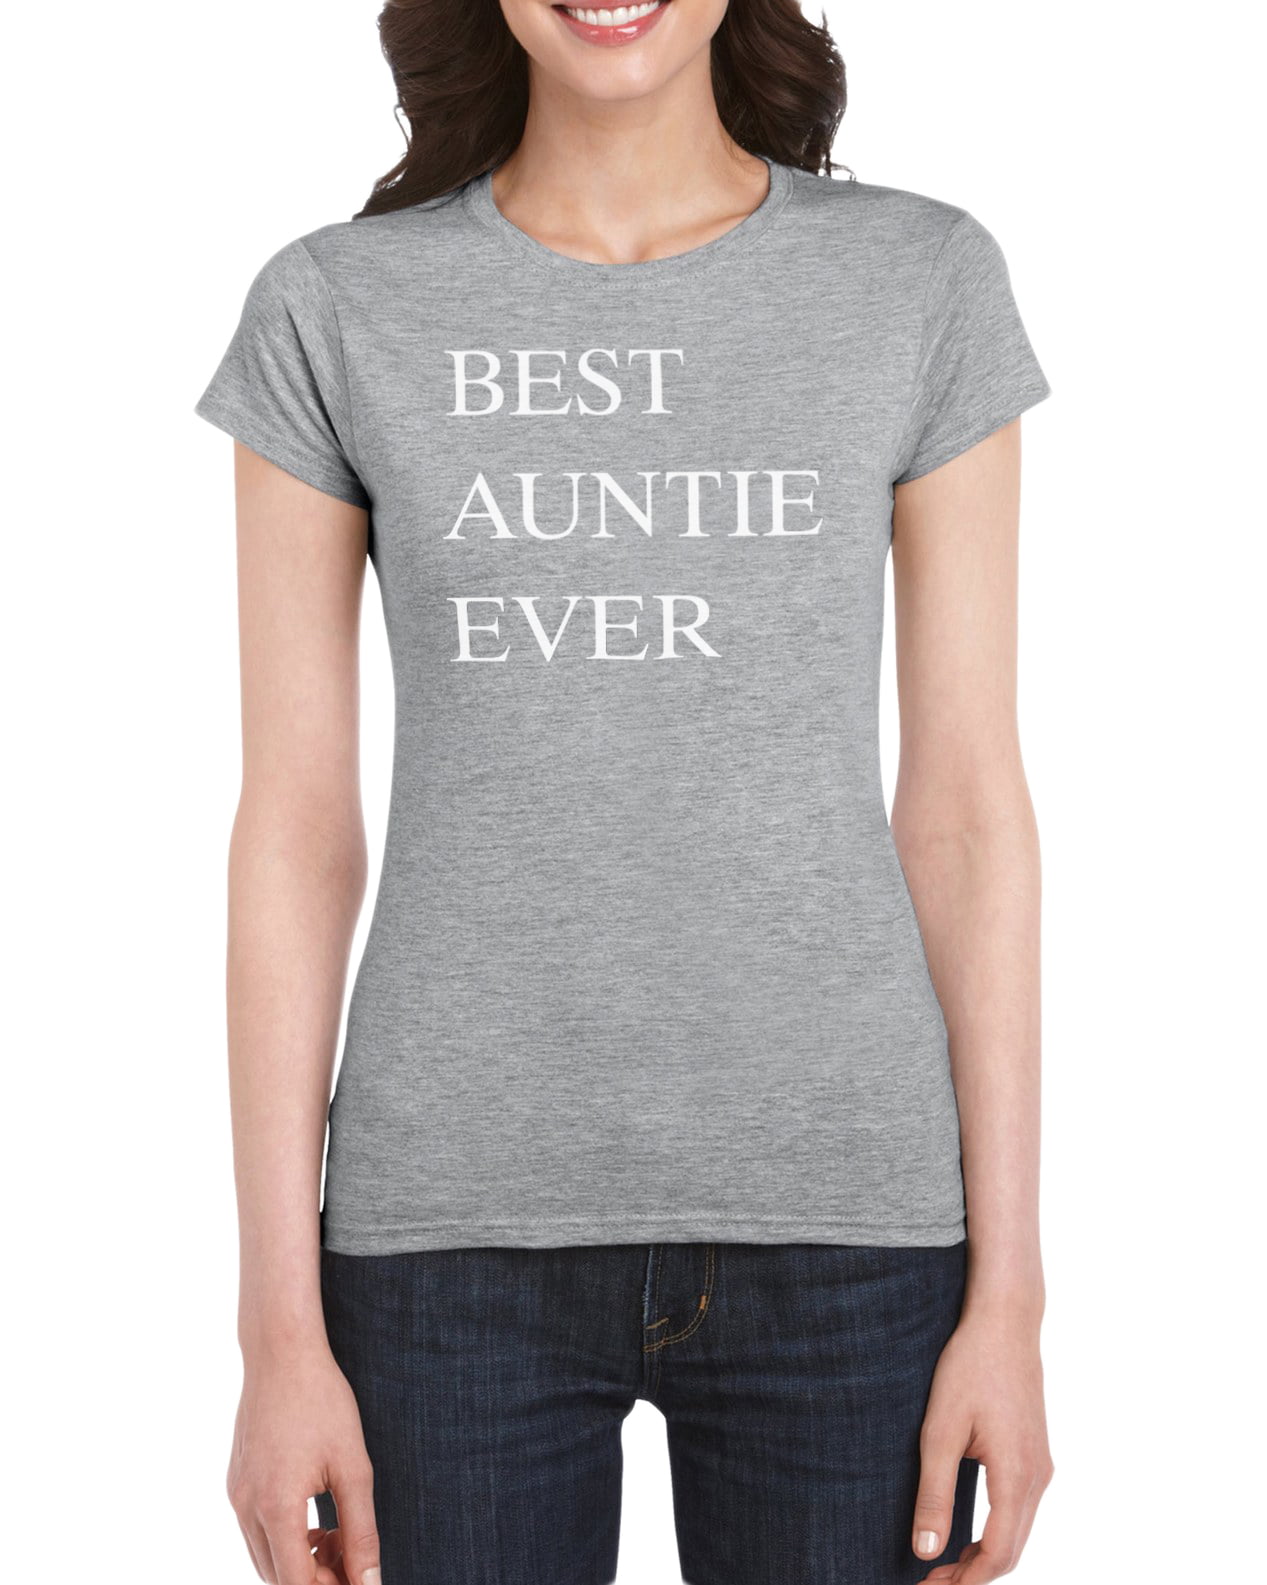 Best Auntie ever shirt BAE Shirt Auntie Shirt Aunt Shirt Gift for Sister Aunt Gift Pregnancy Announcement Shirt